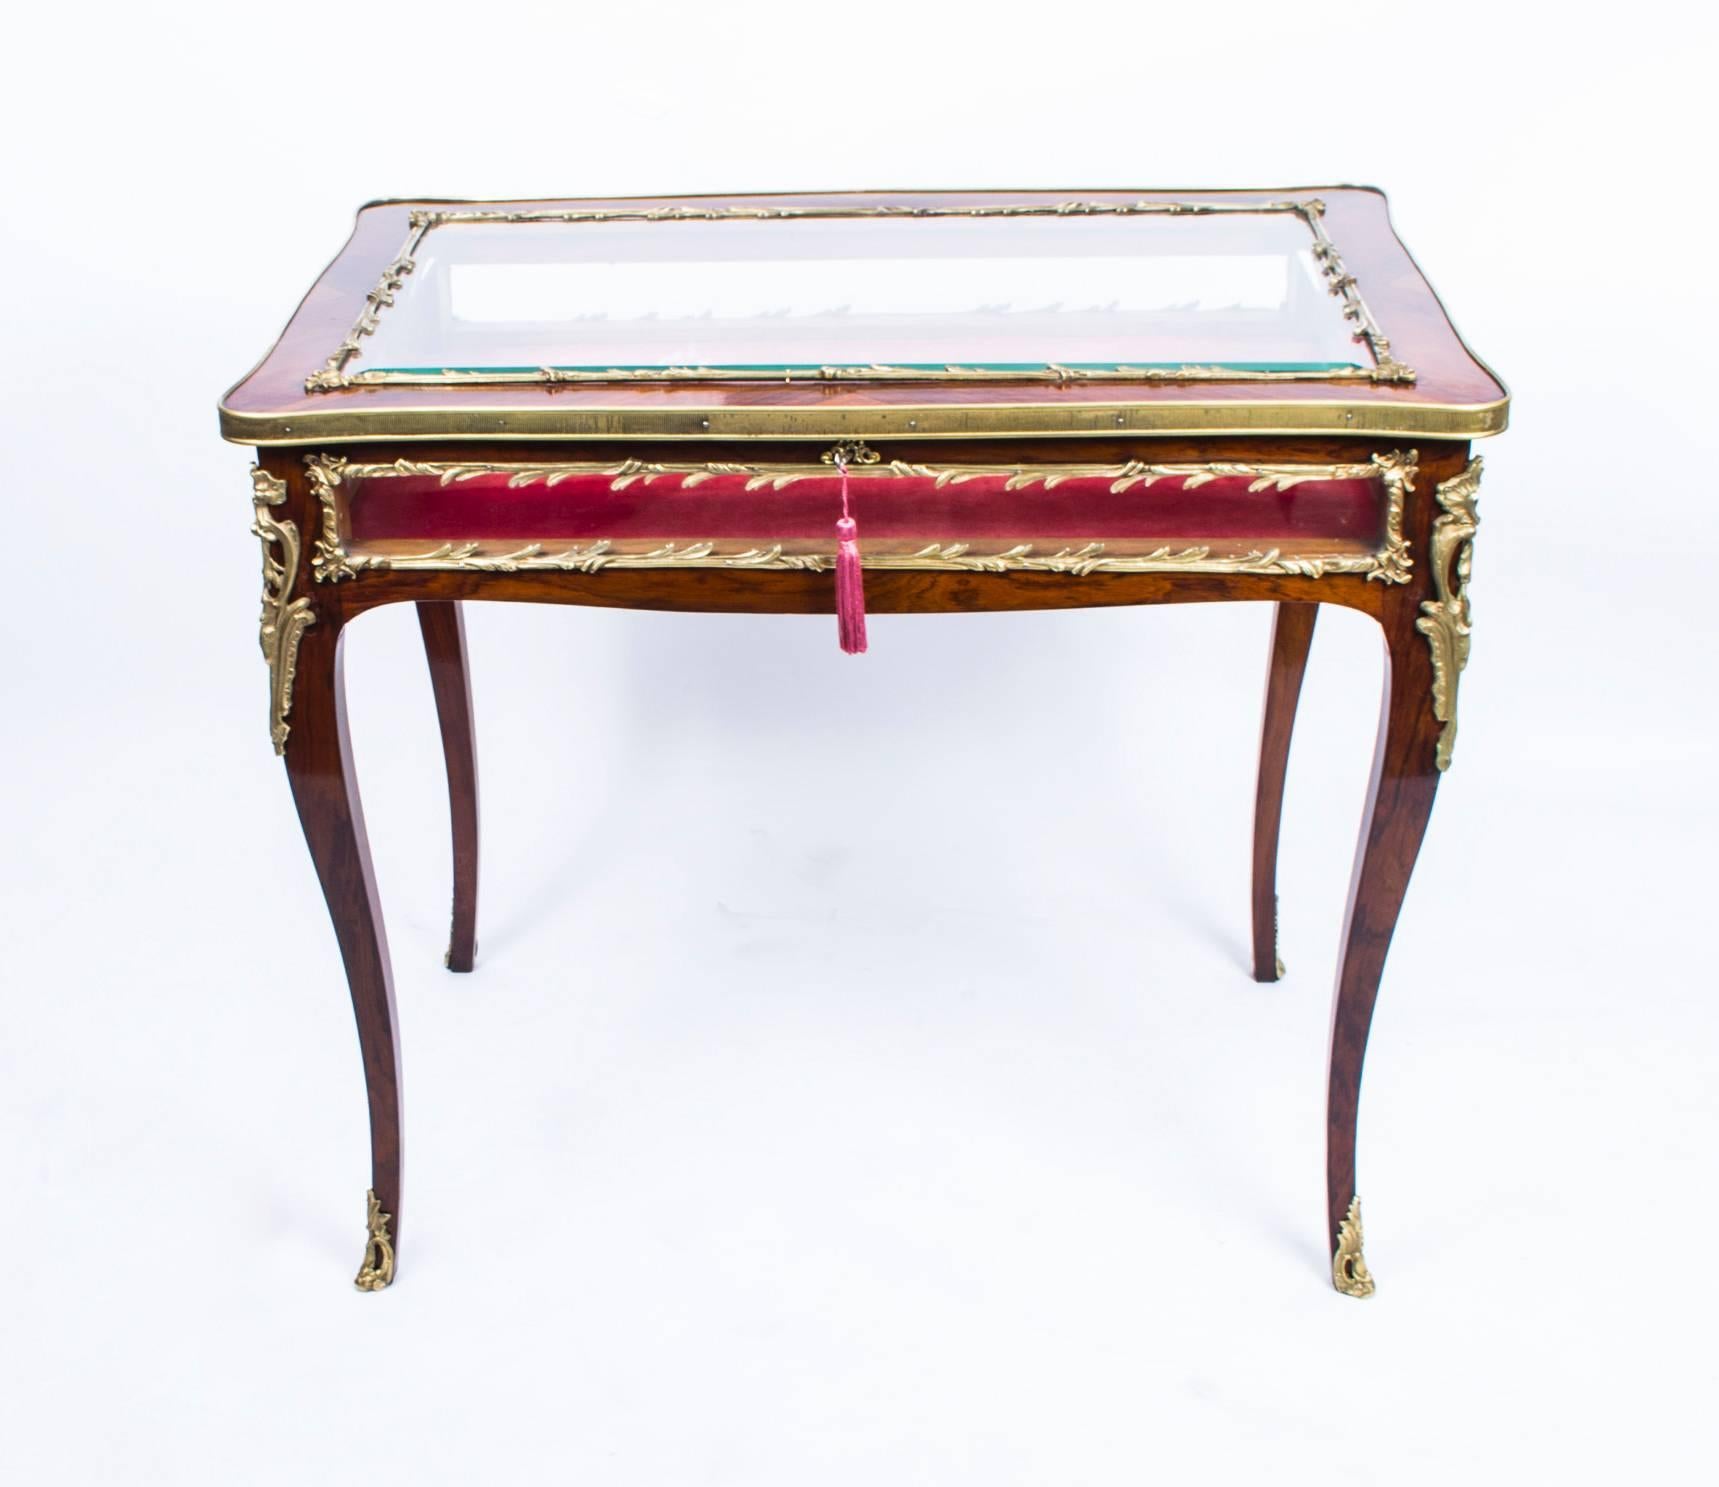 This is a beautiful antique French Kingwood and ormolu-mounted bijouterie display table in the Louis XV style, circa 1880 in date.

It has a bevelled glass lid and glass sides, it has it's original light pink velvet lining. The glass is framed